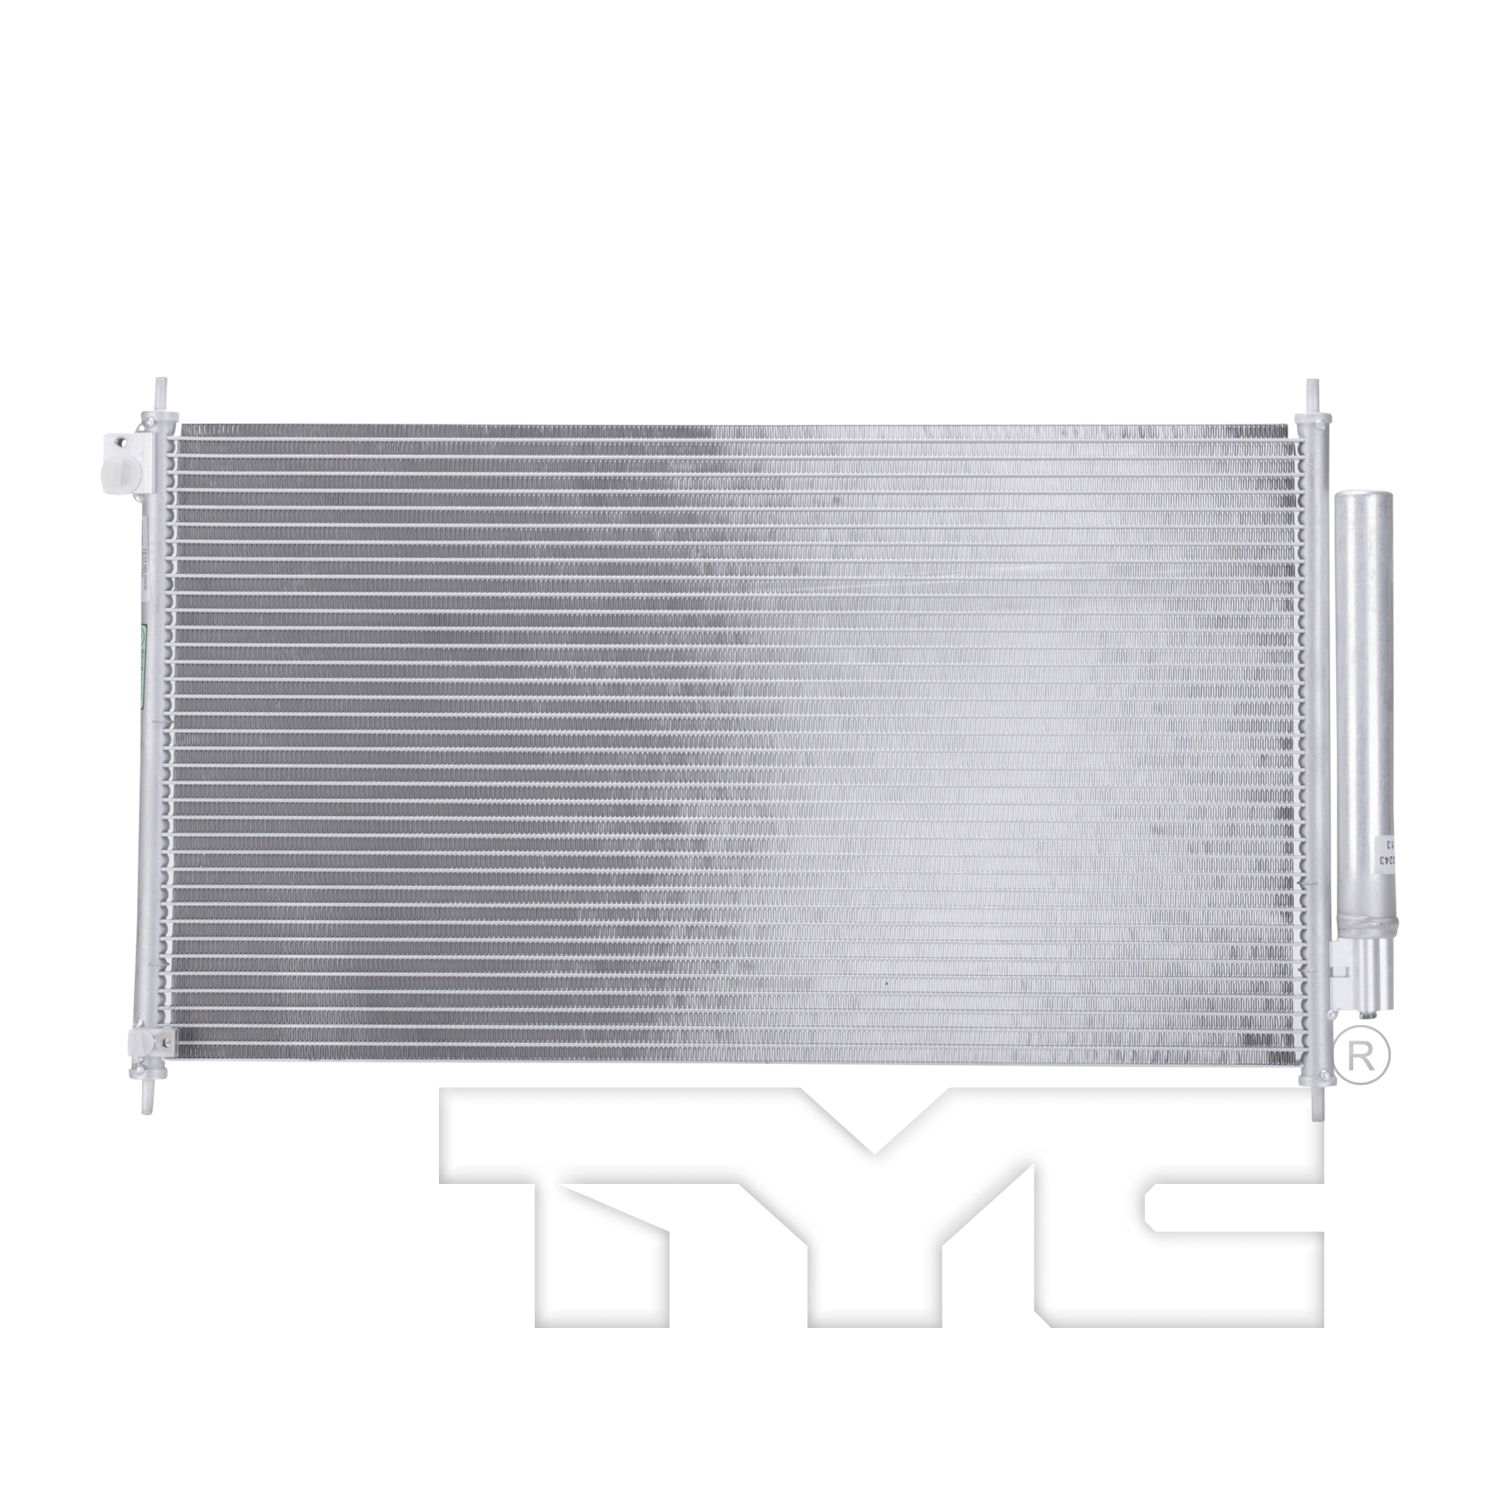 Aftermarket AC CONDENSERS for HONDA - CIVIC, CIVIC,12-15,Air conditioning condenser